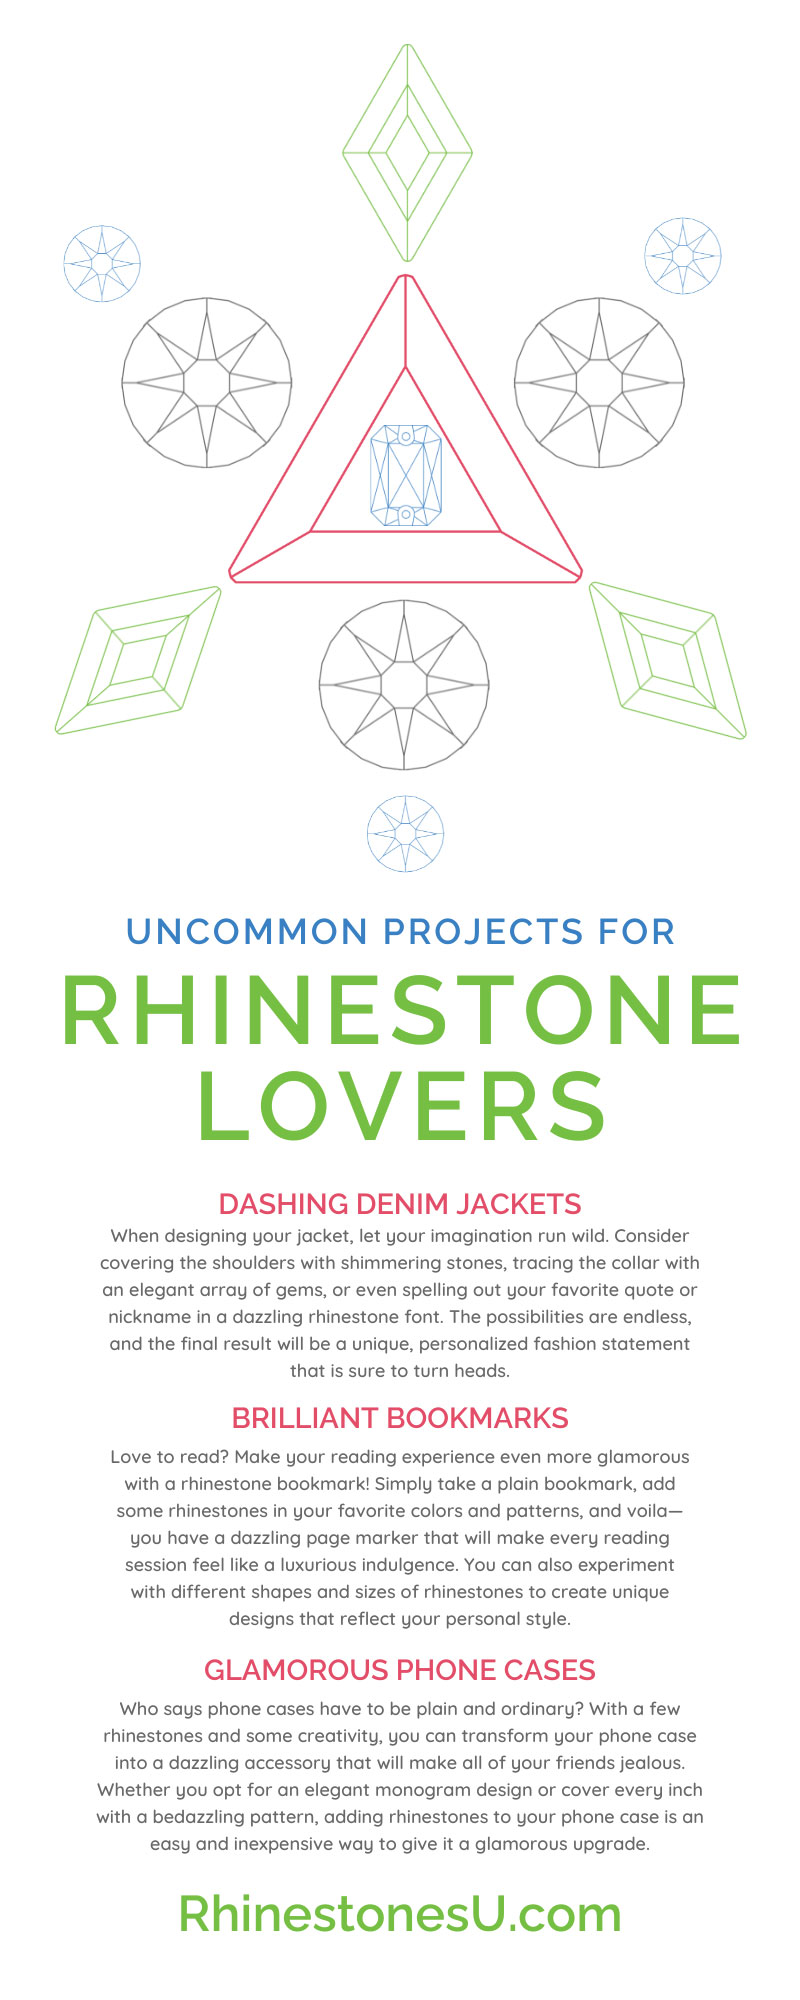 10 Uncommon Projects for Rhinestone Lovers